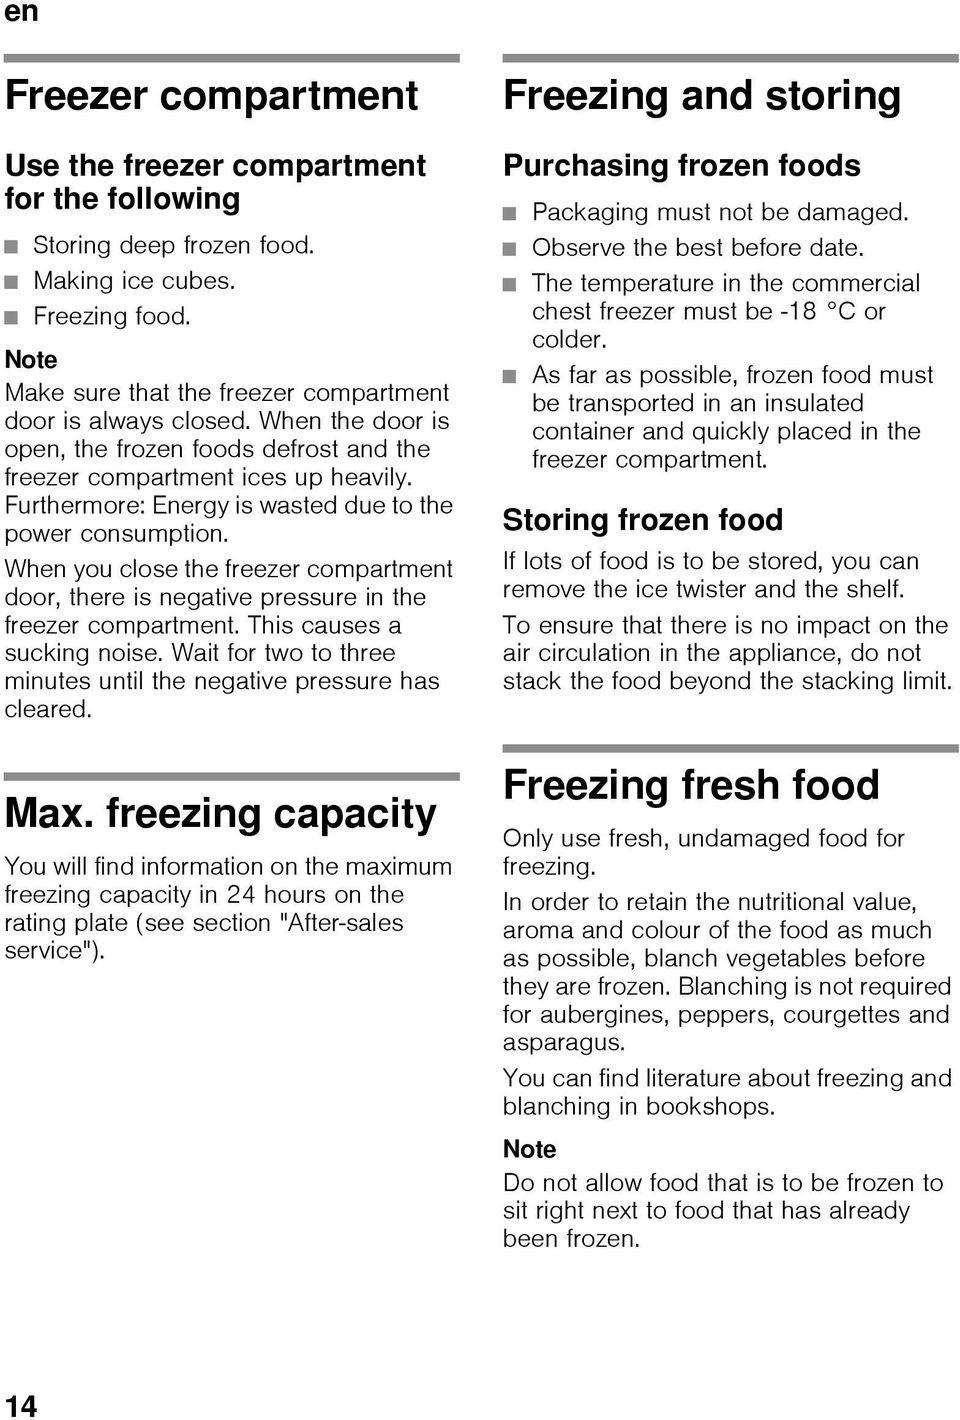 When you close the freezer compartment door, there is negative pressure in the freezer compartment. This causes a sucking noise. Wait for two to three minutes until the negative pressure has cleared.